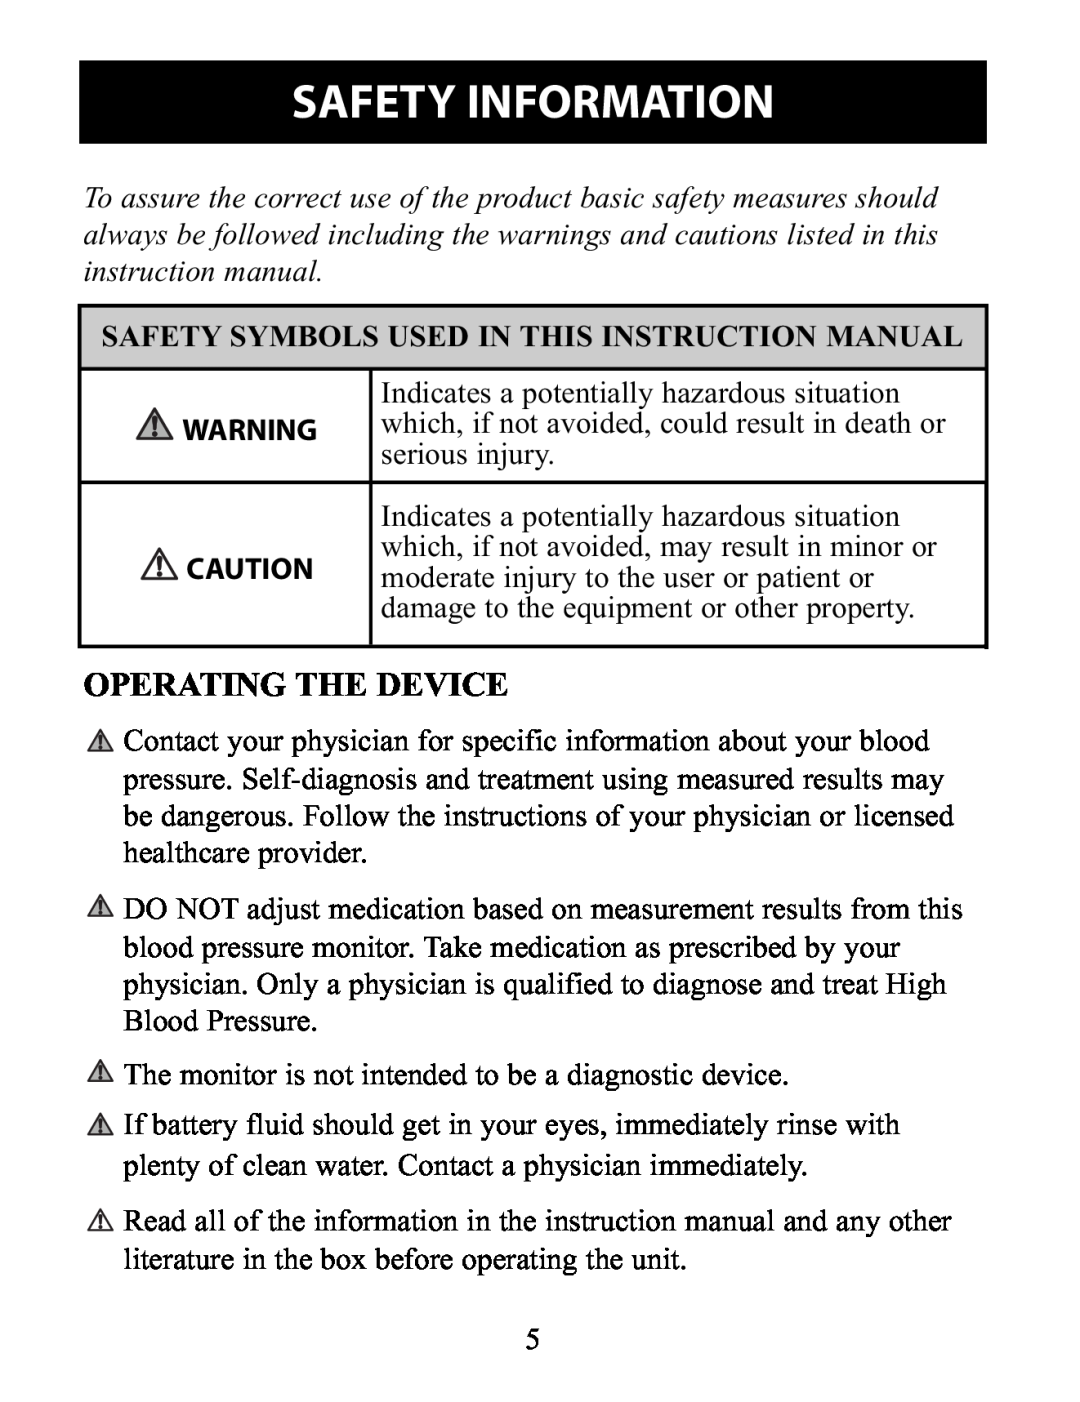 Omron Healthcare BP791IT Safety Information, Operating The Device, Safety Symbols Used In This Instruction Manual 